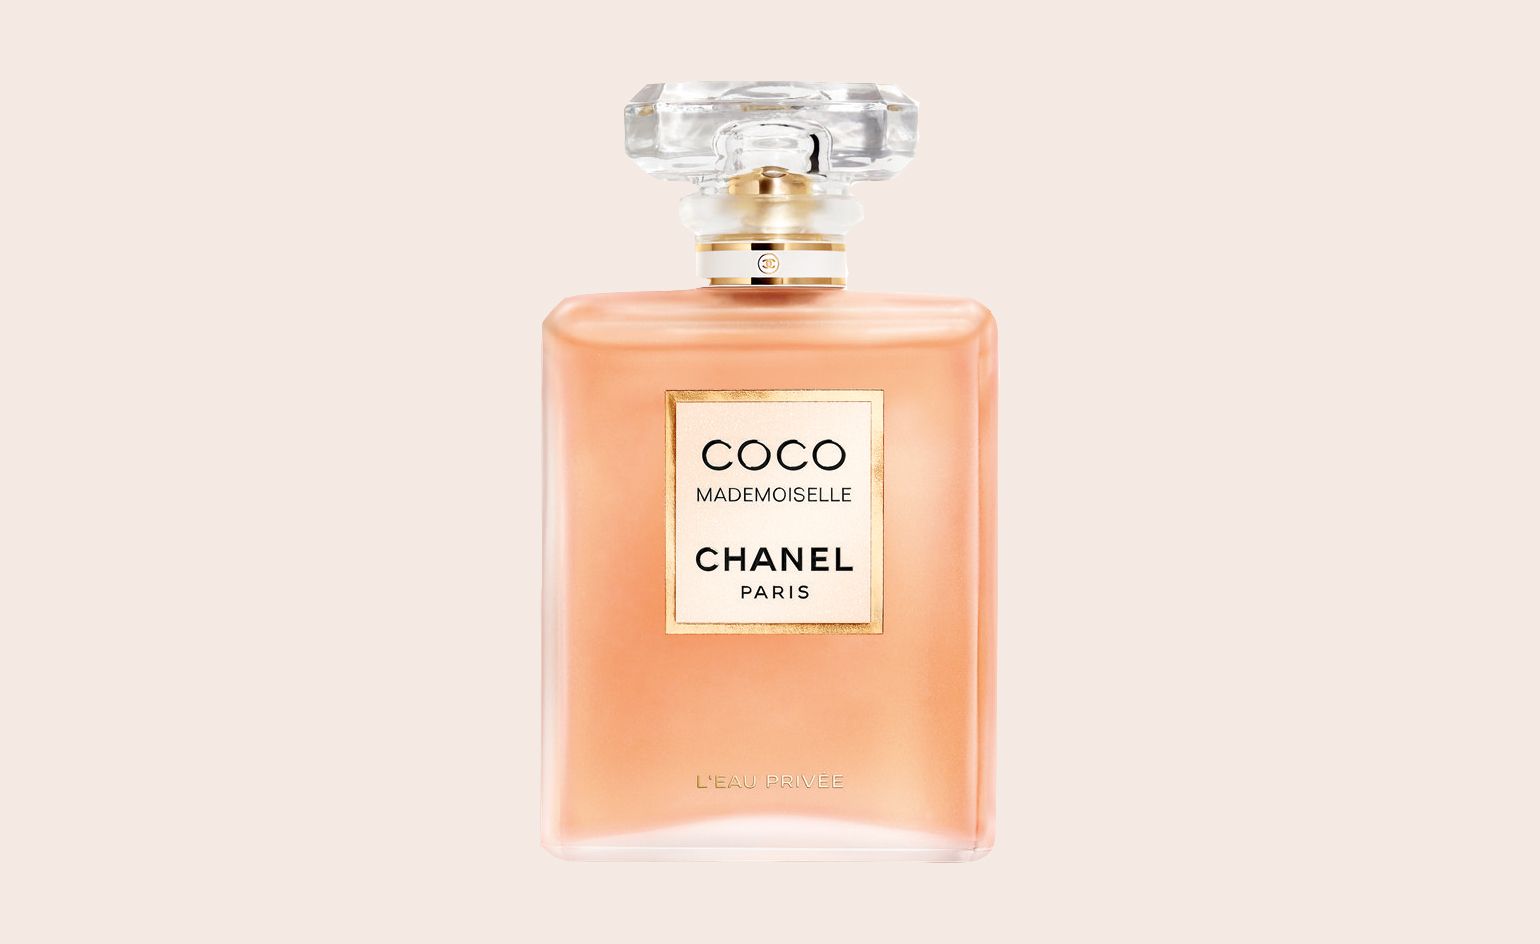 Sweet Dreams: Chanel's classic fragrance gets ready for bed. Wallpaper*